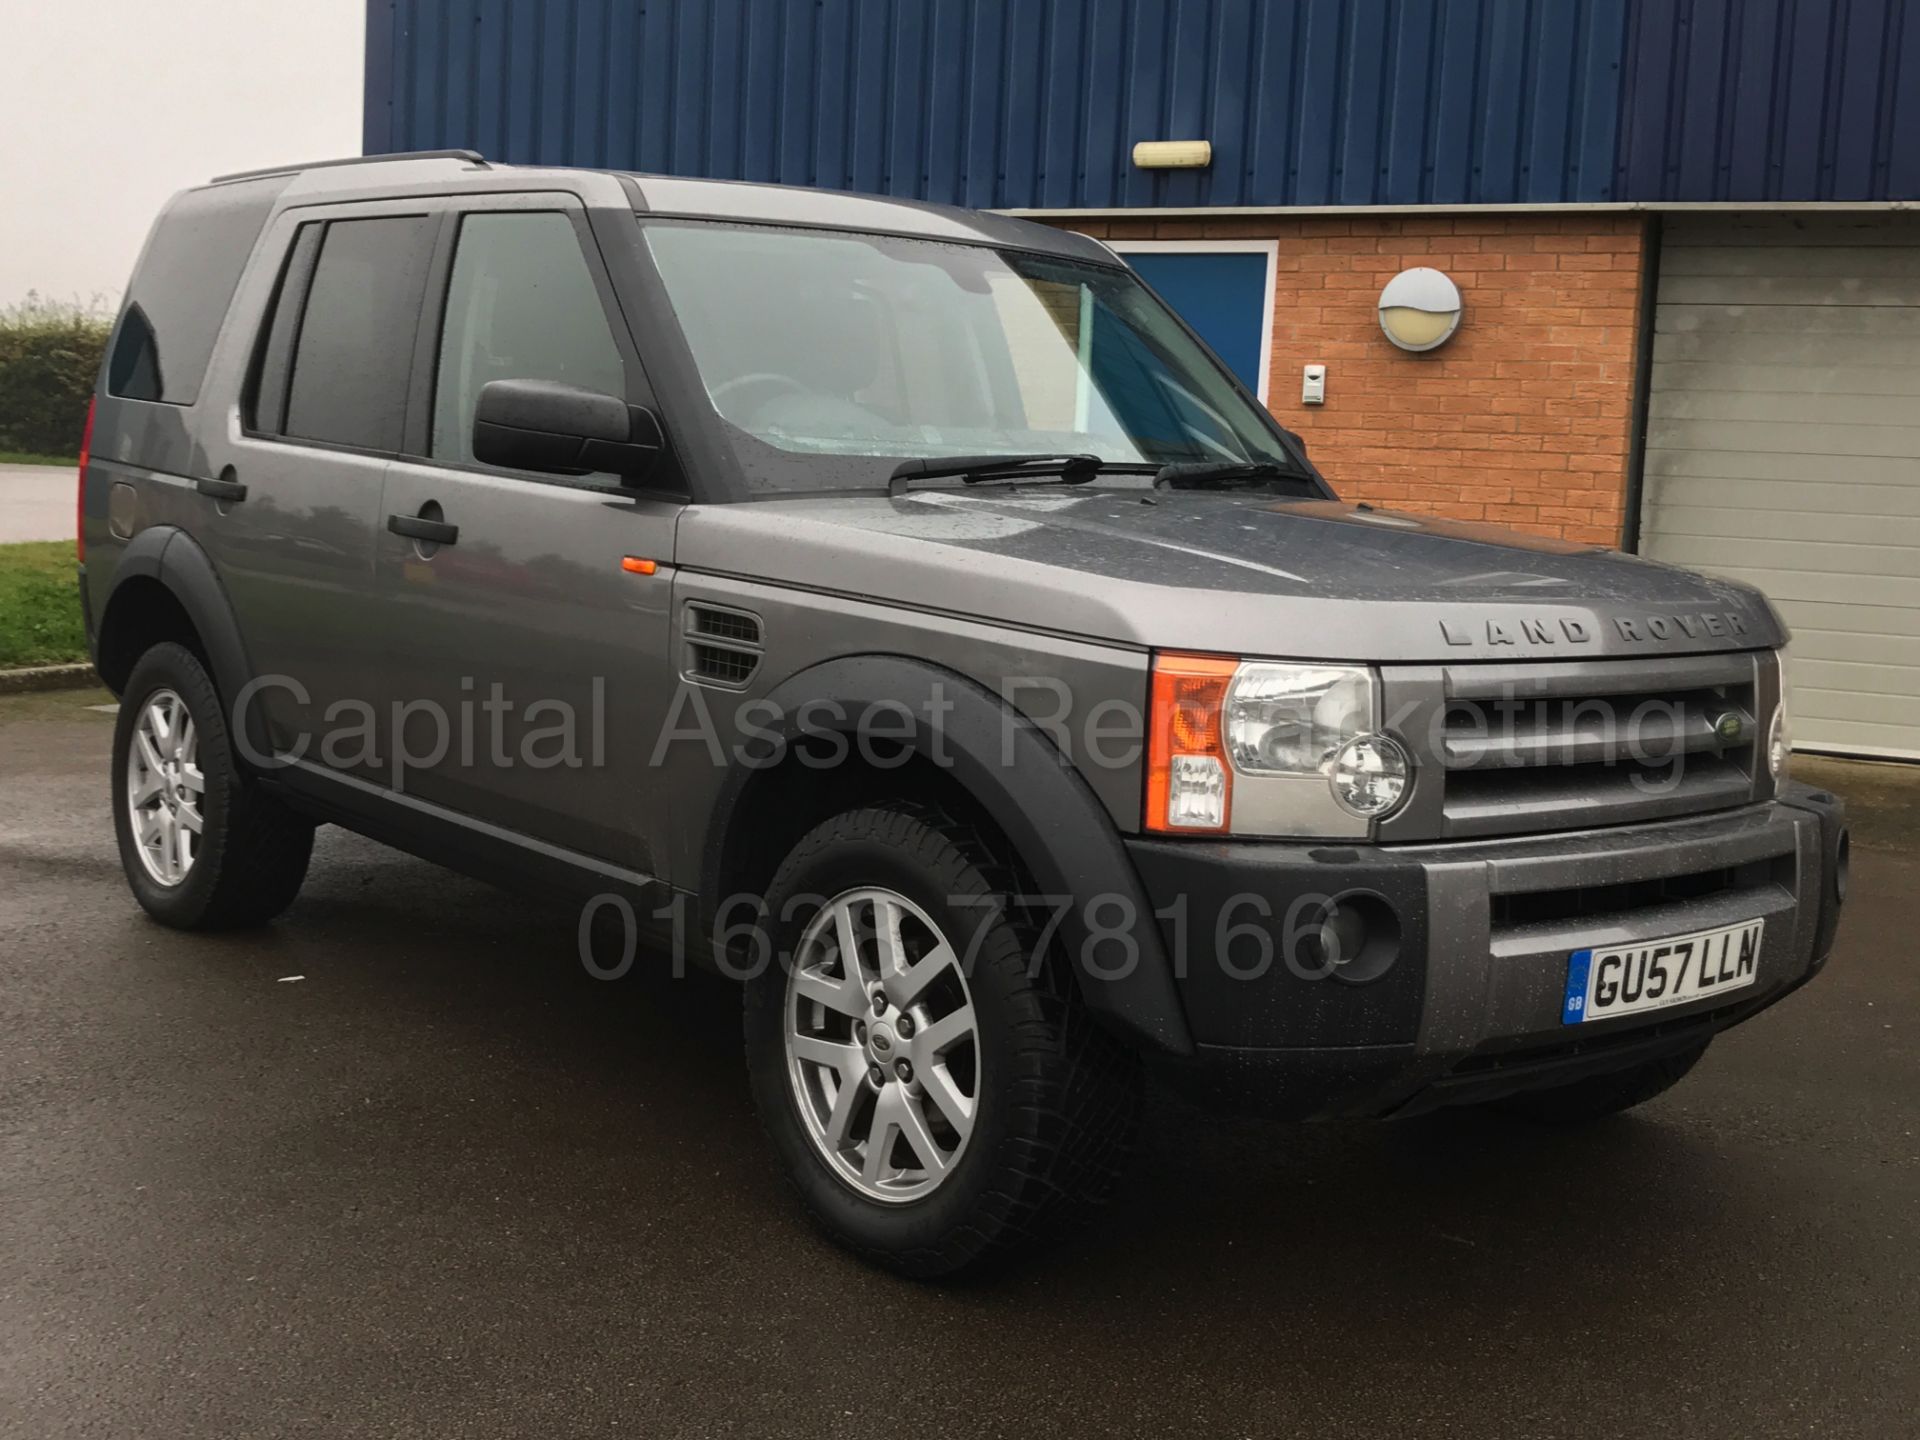 (On Sale) LAND ROVER DISCOVERY 3 XS 'COMMERCIAL' (2008 MODEL) 'TDV6 - 190 BHP - AUTO' - Image 2 of 30